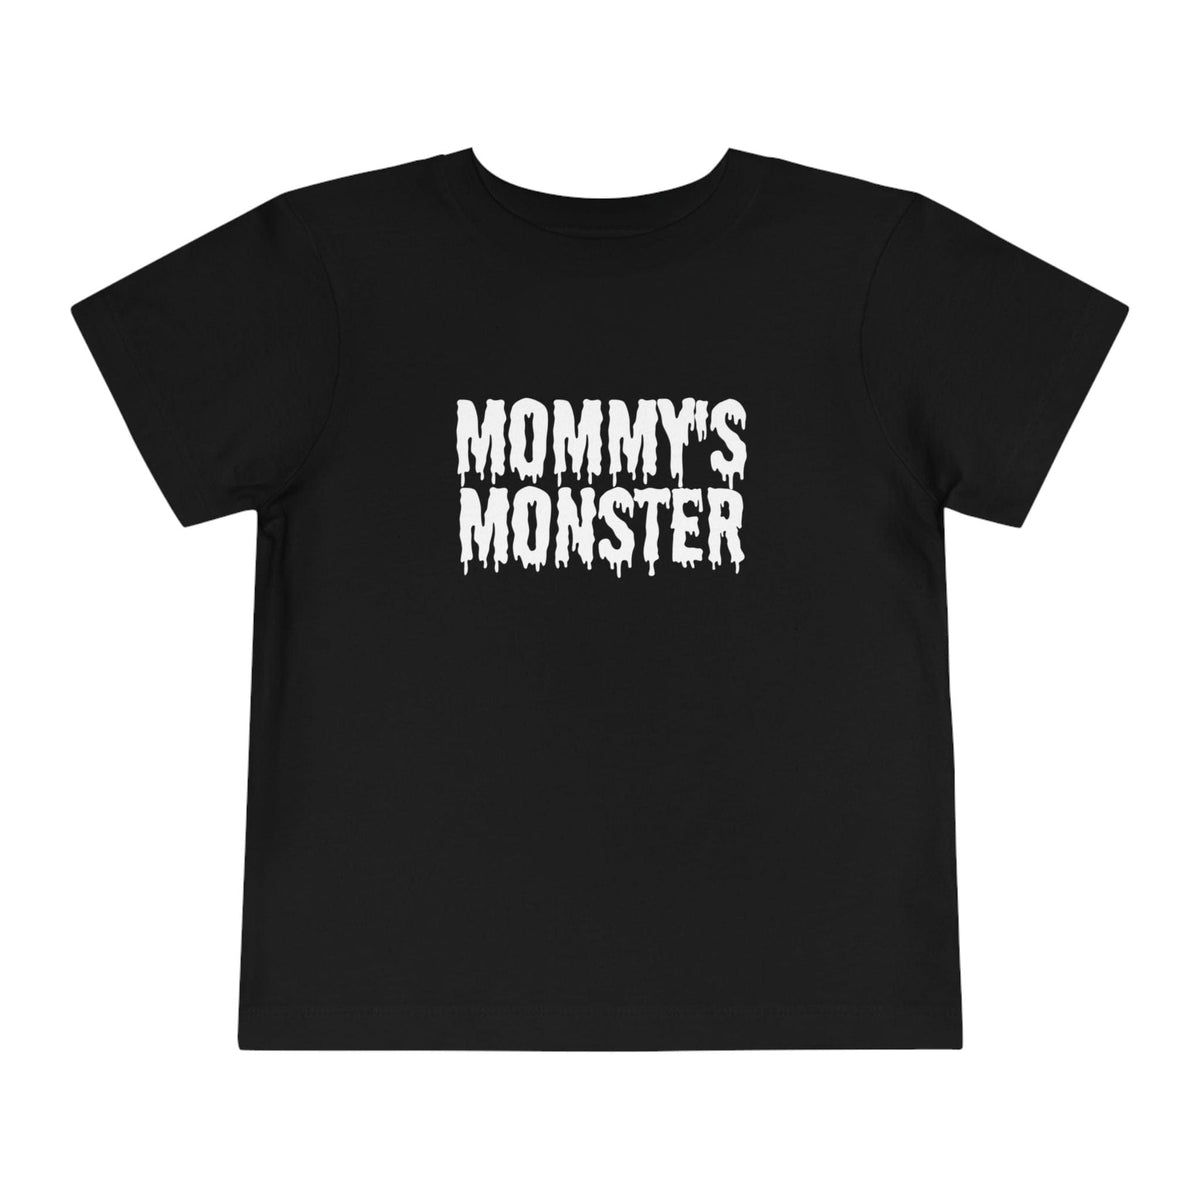 Kids clothes Black / 3T Mommy's Monster Toddler Short Sleeve Graphic Tee